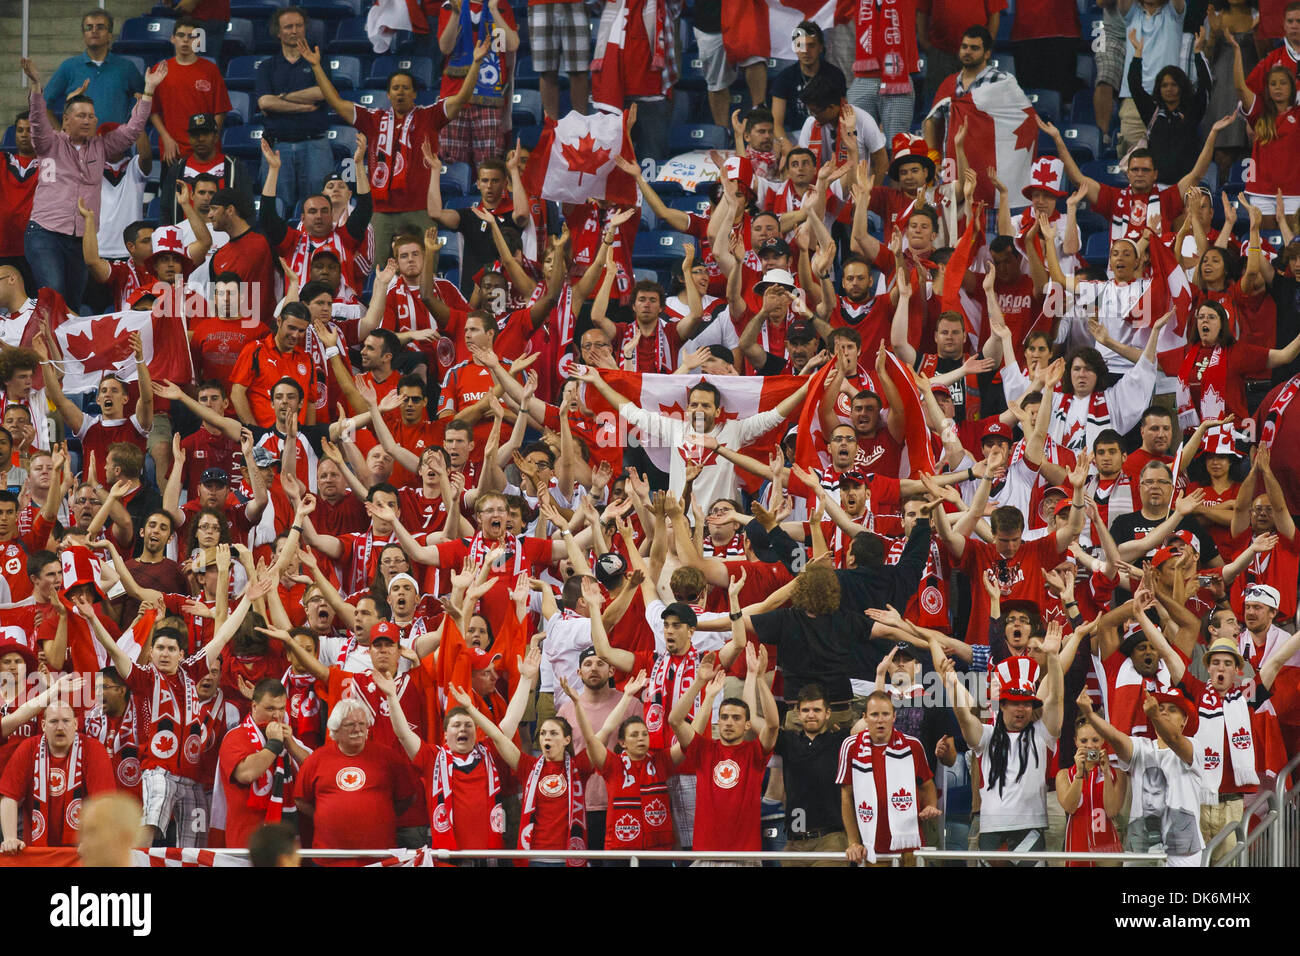 June 7, 2011 - Detroit, Michigan, U.S - Team Canada supporters cheer during first-half match action.  The United States defeated Canada 2-0 in the second match of the Group C-play opening round doubleheader of the 2011 CONCACAF Gold Cup soccer tournament played at Ford Field in Detroit, Michigan. (Credit Image: © Scott Grau/Southcreek Global/ZUMAPRESS.com) Stock Photo